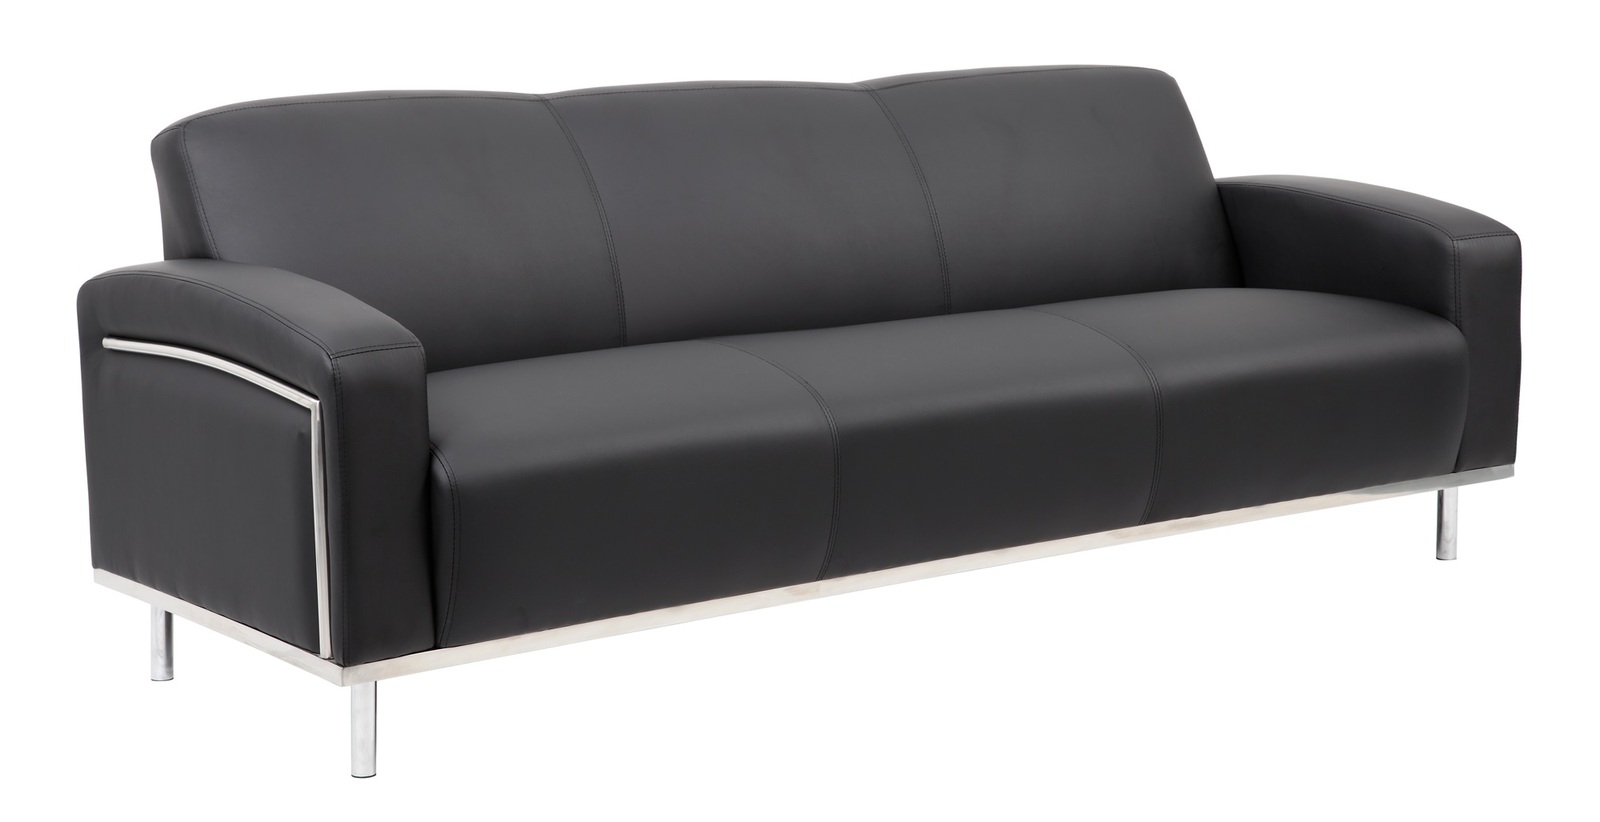 Visitors 3 Seater Lounge Reception Seat Office Furniture Seating YS Design Sienna Black YS903